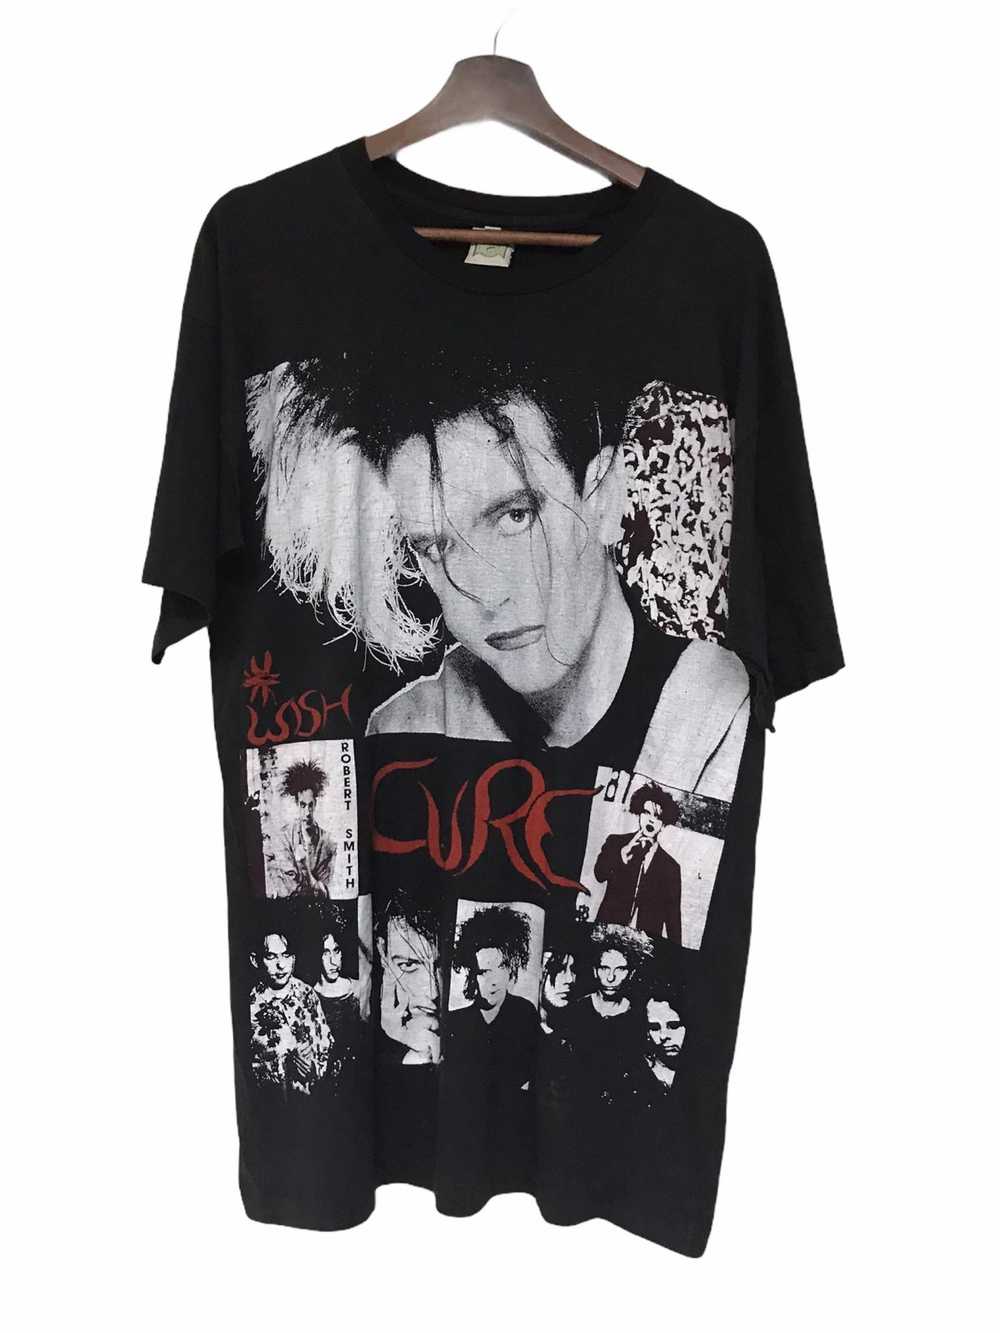 Vintage The Cure bootleg 90s t shirt - image 1